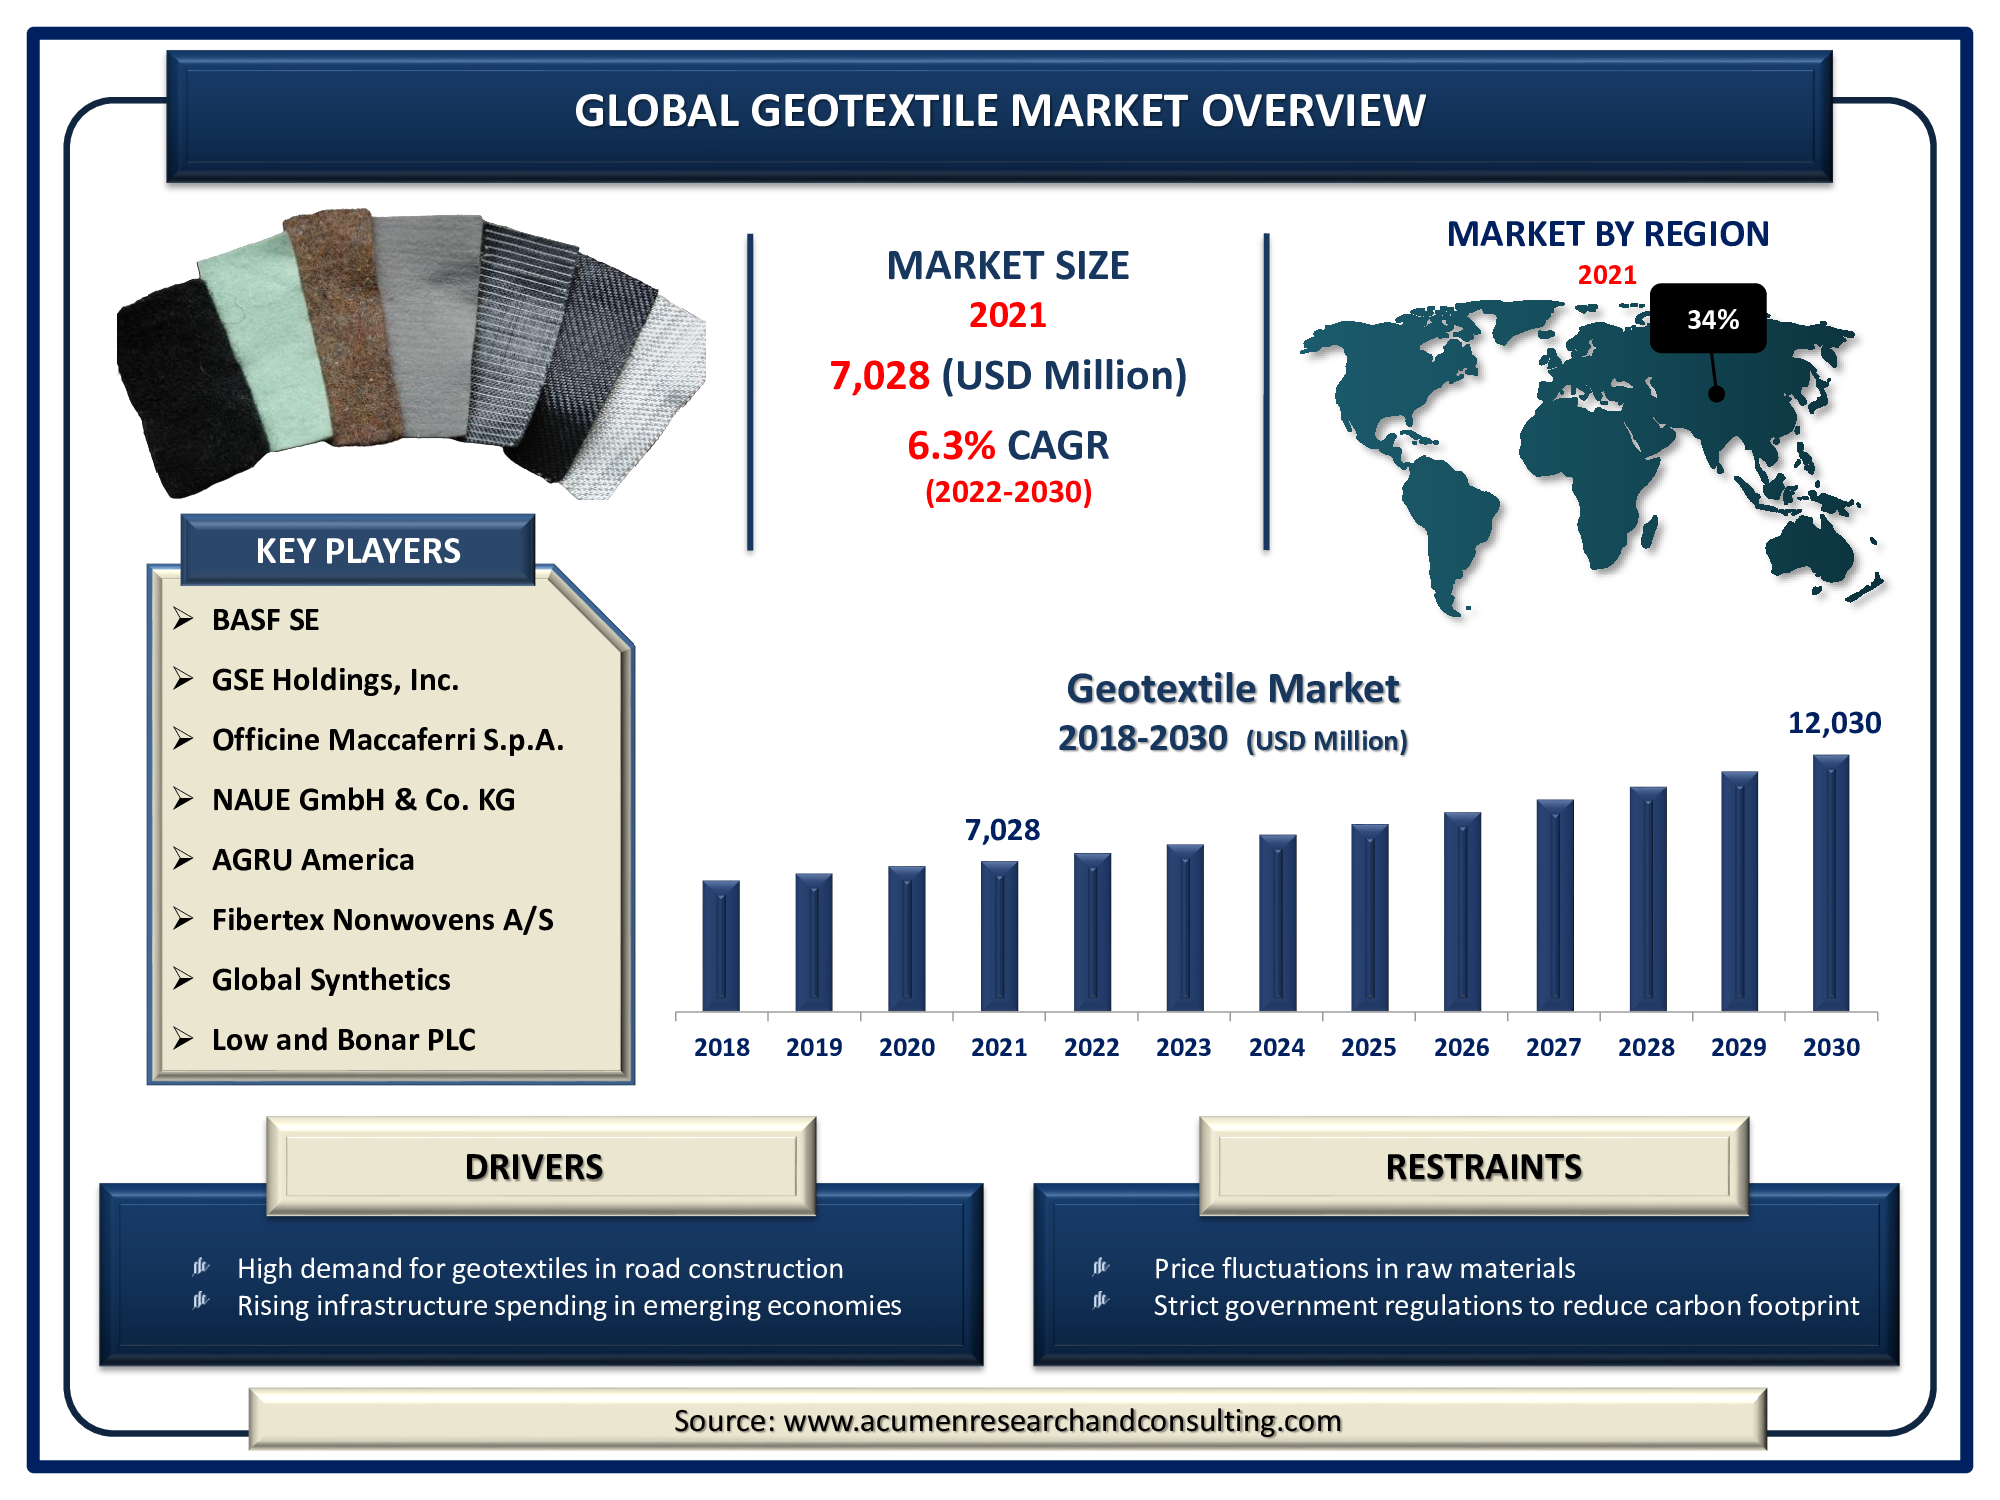 Geotextile Market size accounted for USD 7,028 Mn in 2021 and is expected to reach the value of USD 12,030 Million by 2030 growing at a CAGR of 6.3% during the forecast period from 2022 to 2030.